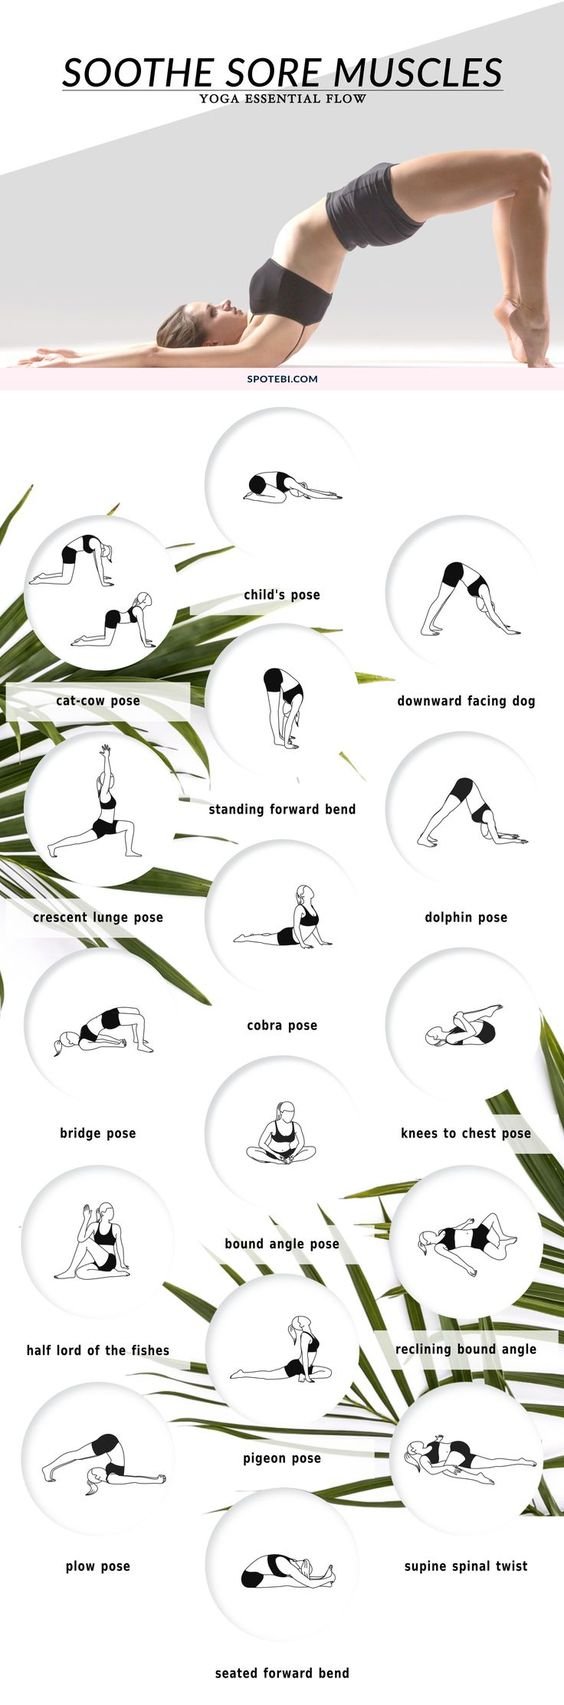 Ways to Ease Sore Muscles at Home